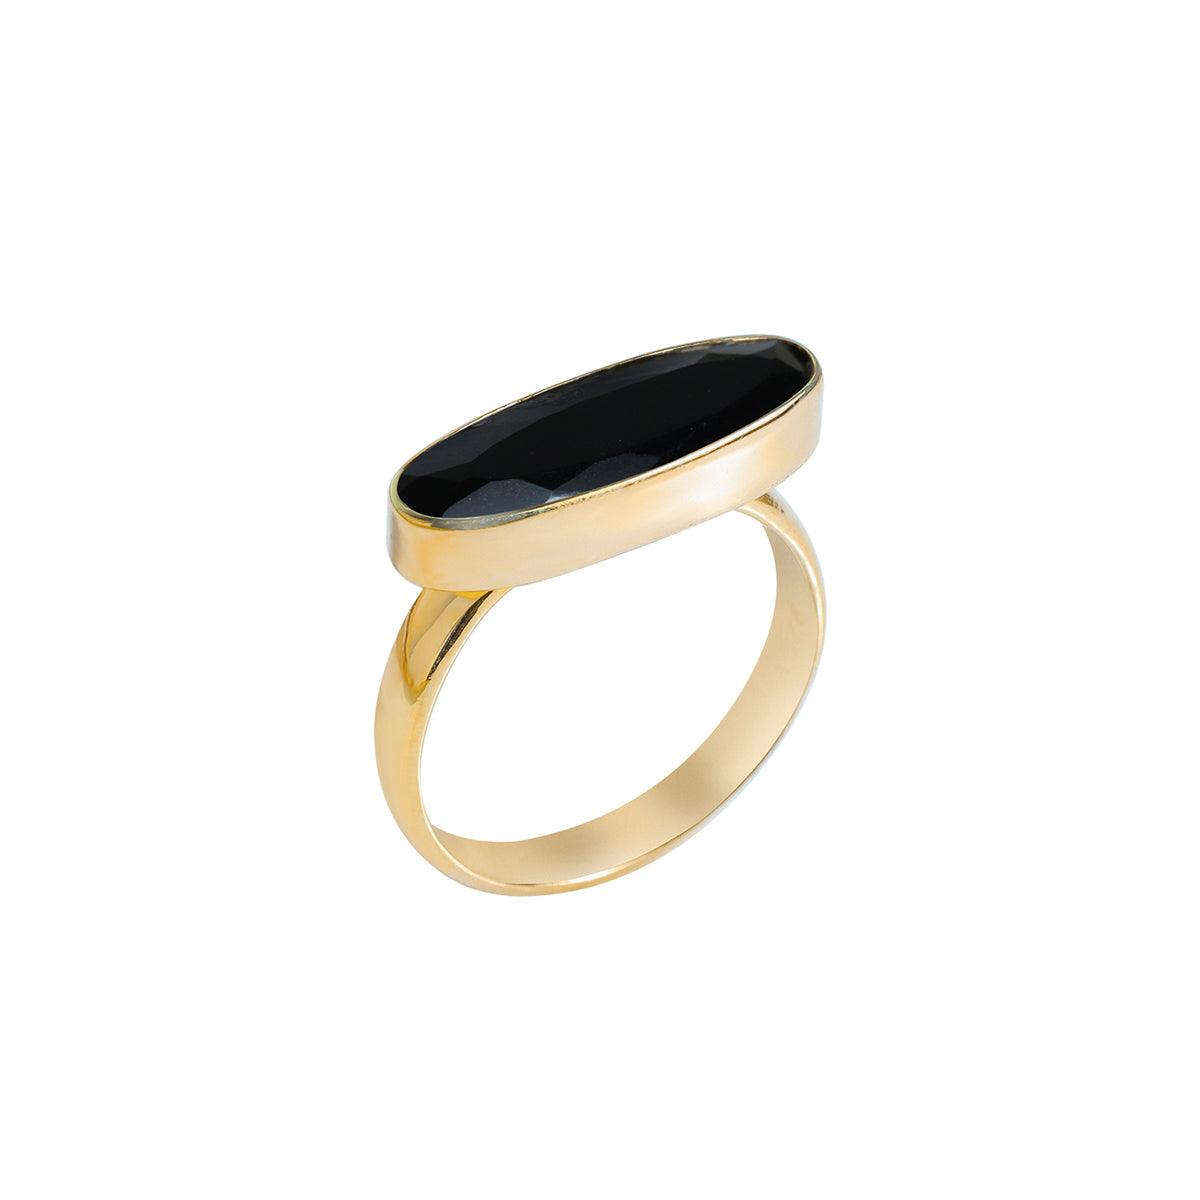 Black Onyx Ring in 14k Gold Over Silver Jewelry - YoTreasure